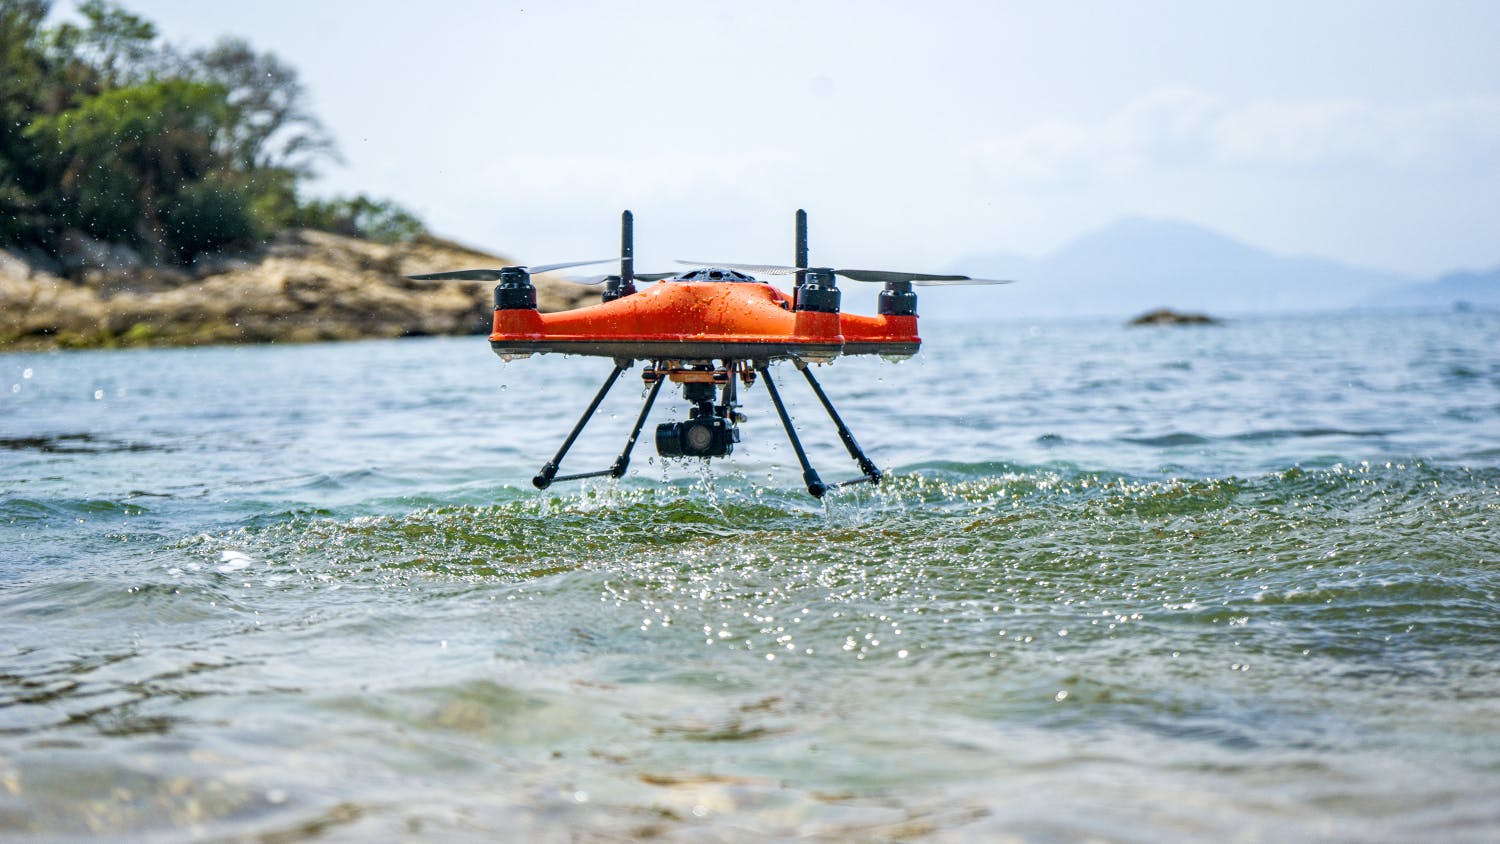 SwellPro Splash Drone 4 Pro Fisherman with Payload Release & 4K Camera on 1-Axis Gimbal